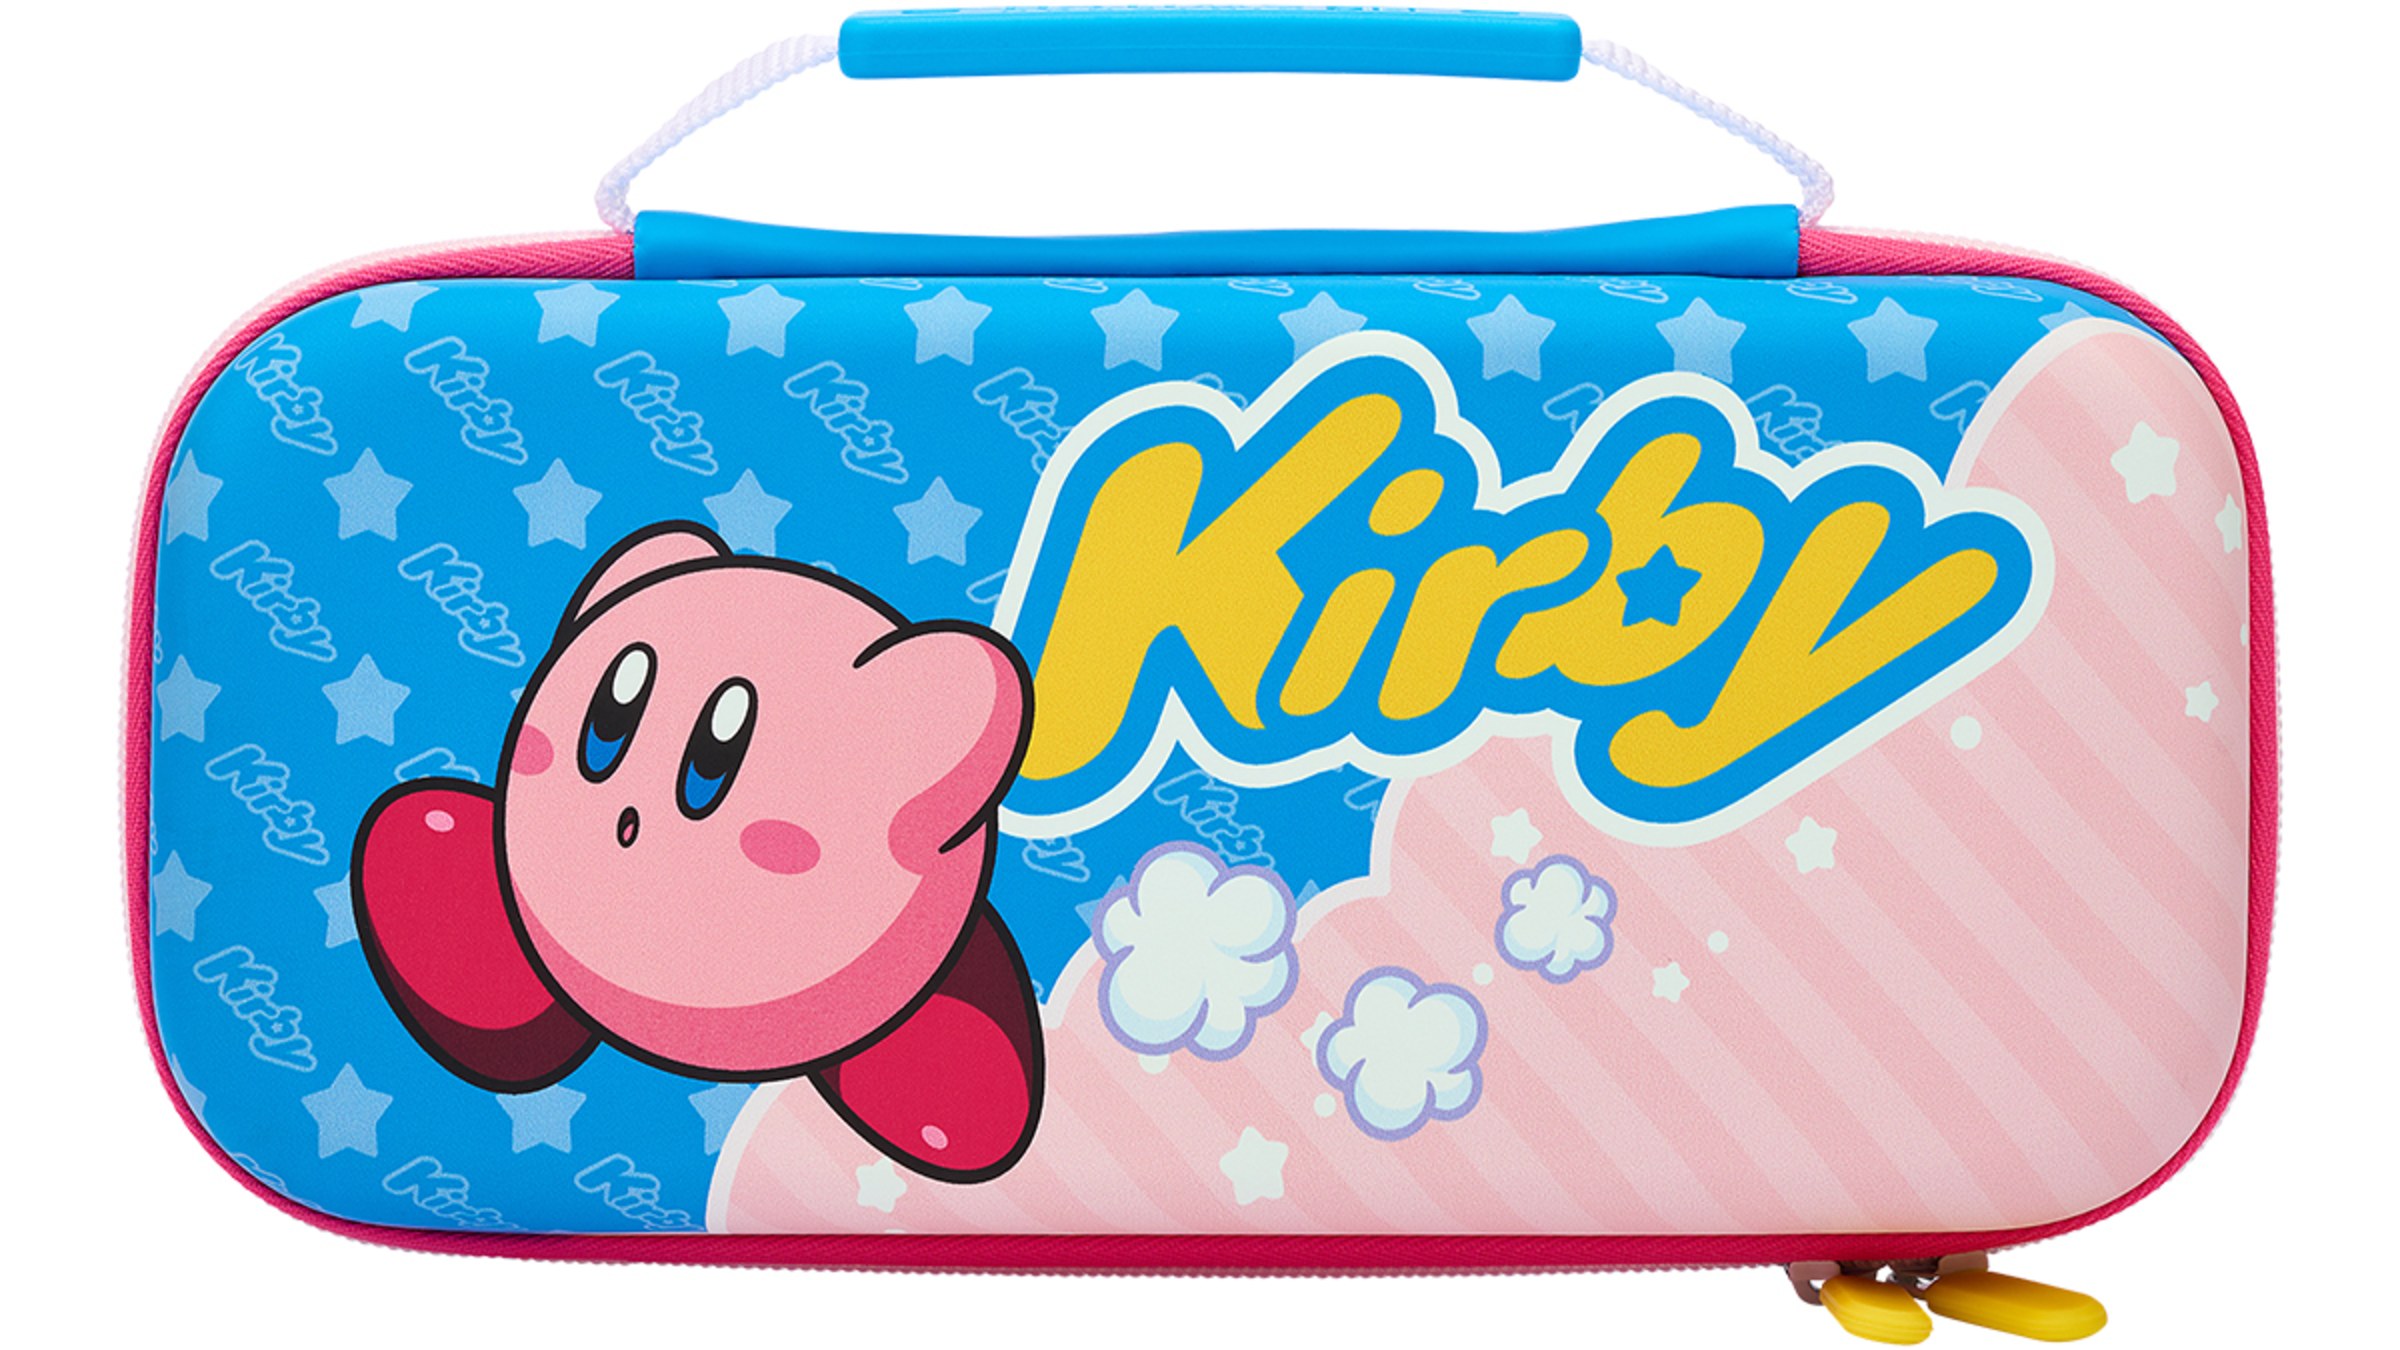 Protection Case - Kirby™